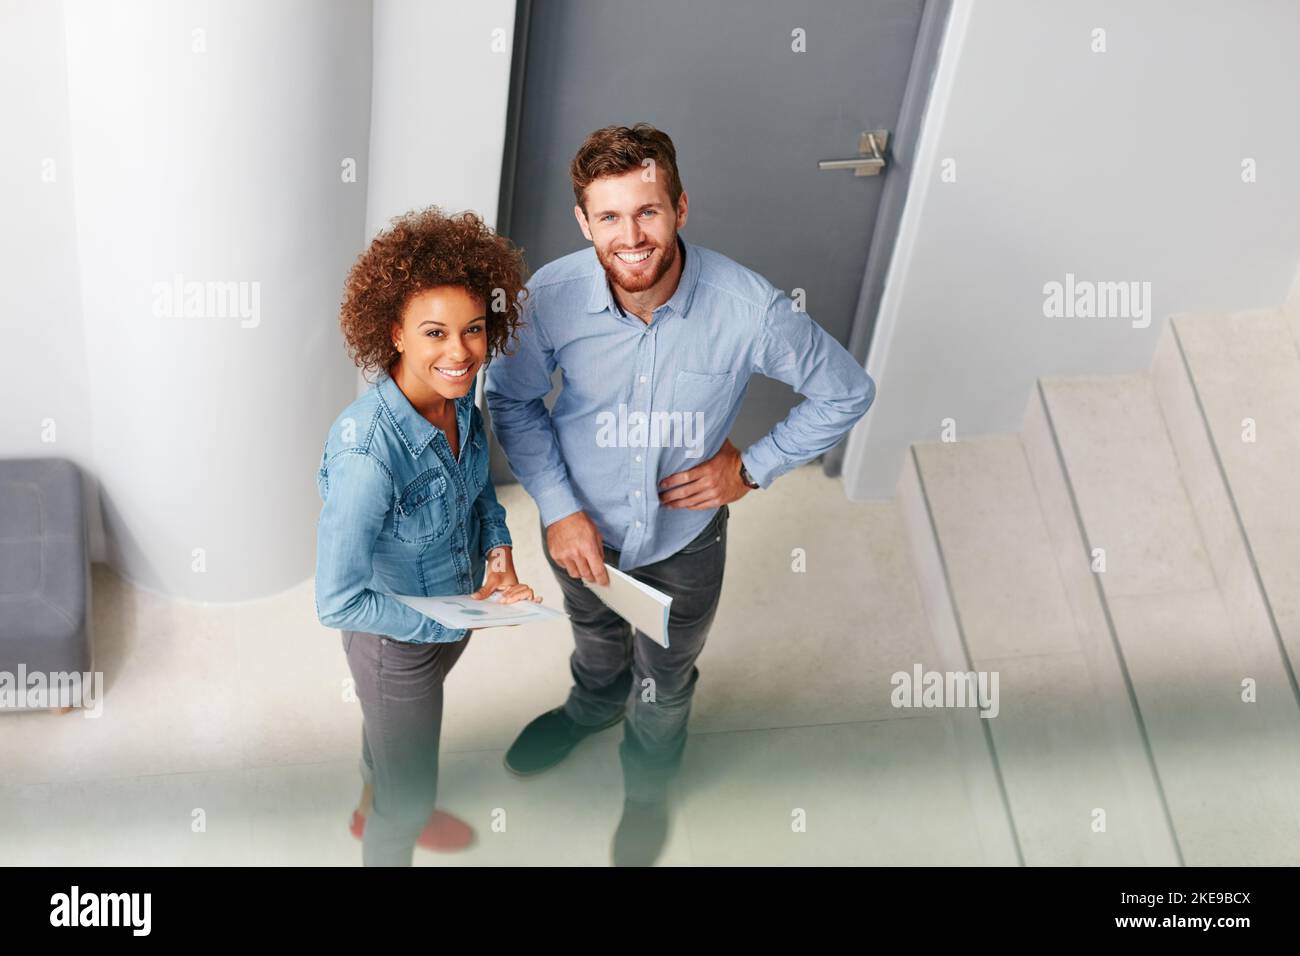 Were determined to overcome any challenge. two colleagues standing together in an office. Stock Photo